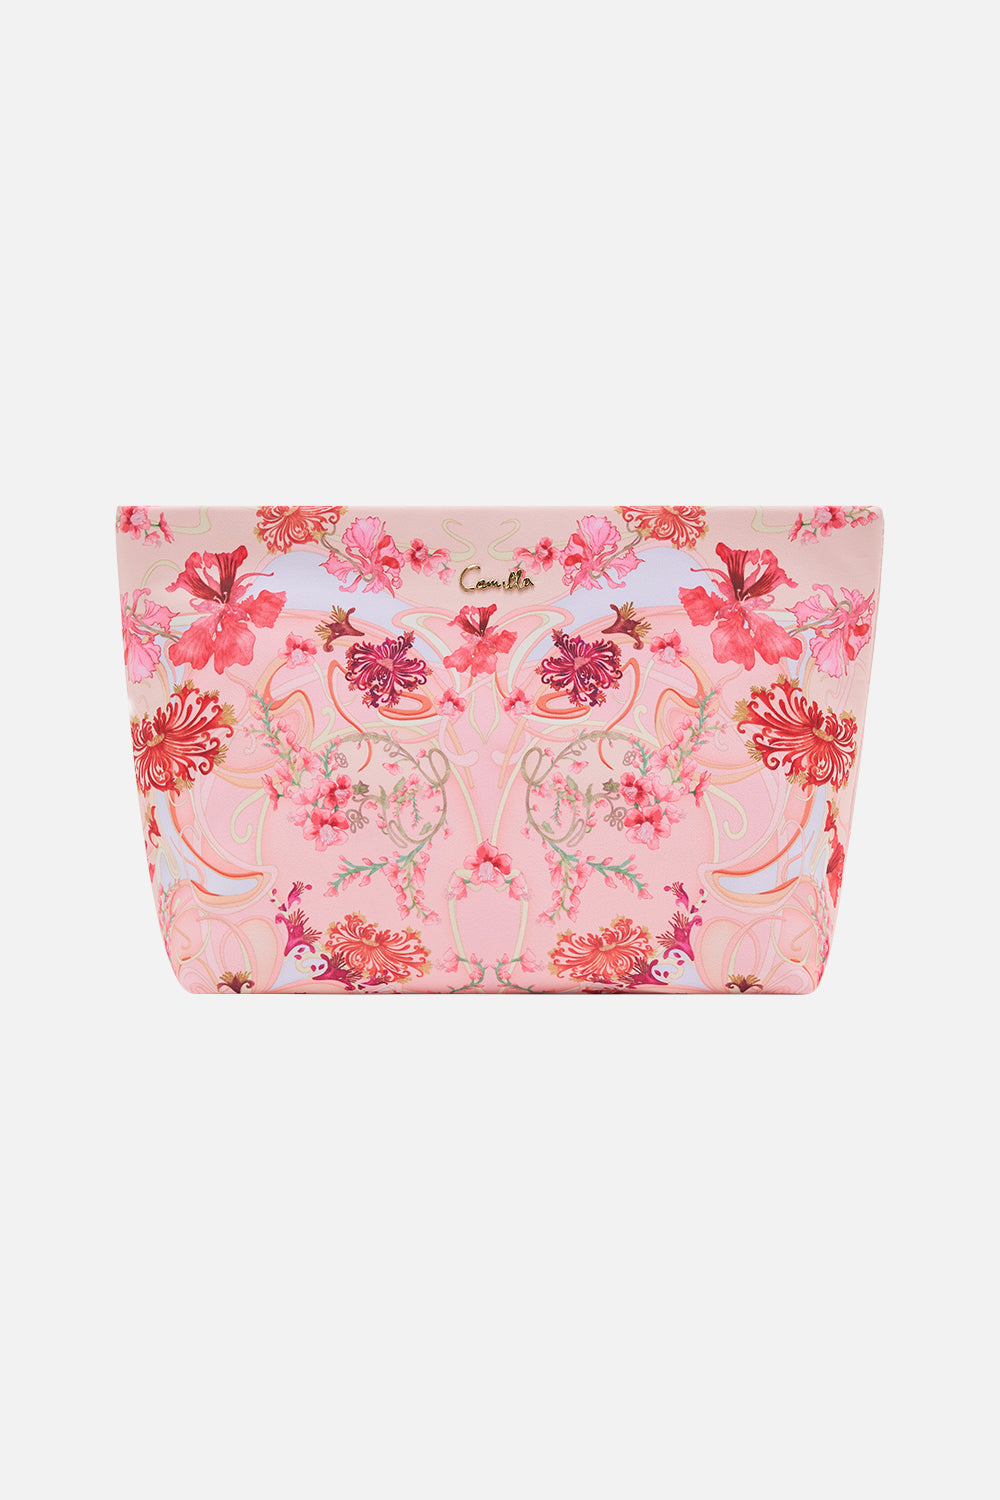 LARGE MAKEUP CLUTCH BLOSSOMS AND BRUSHSTROKES